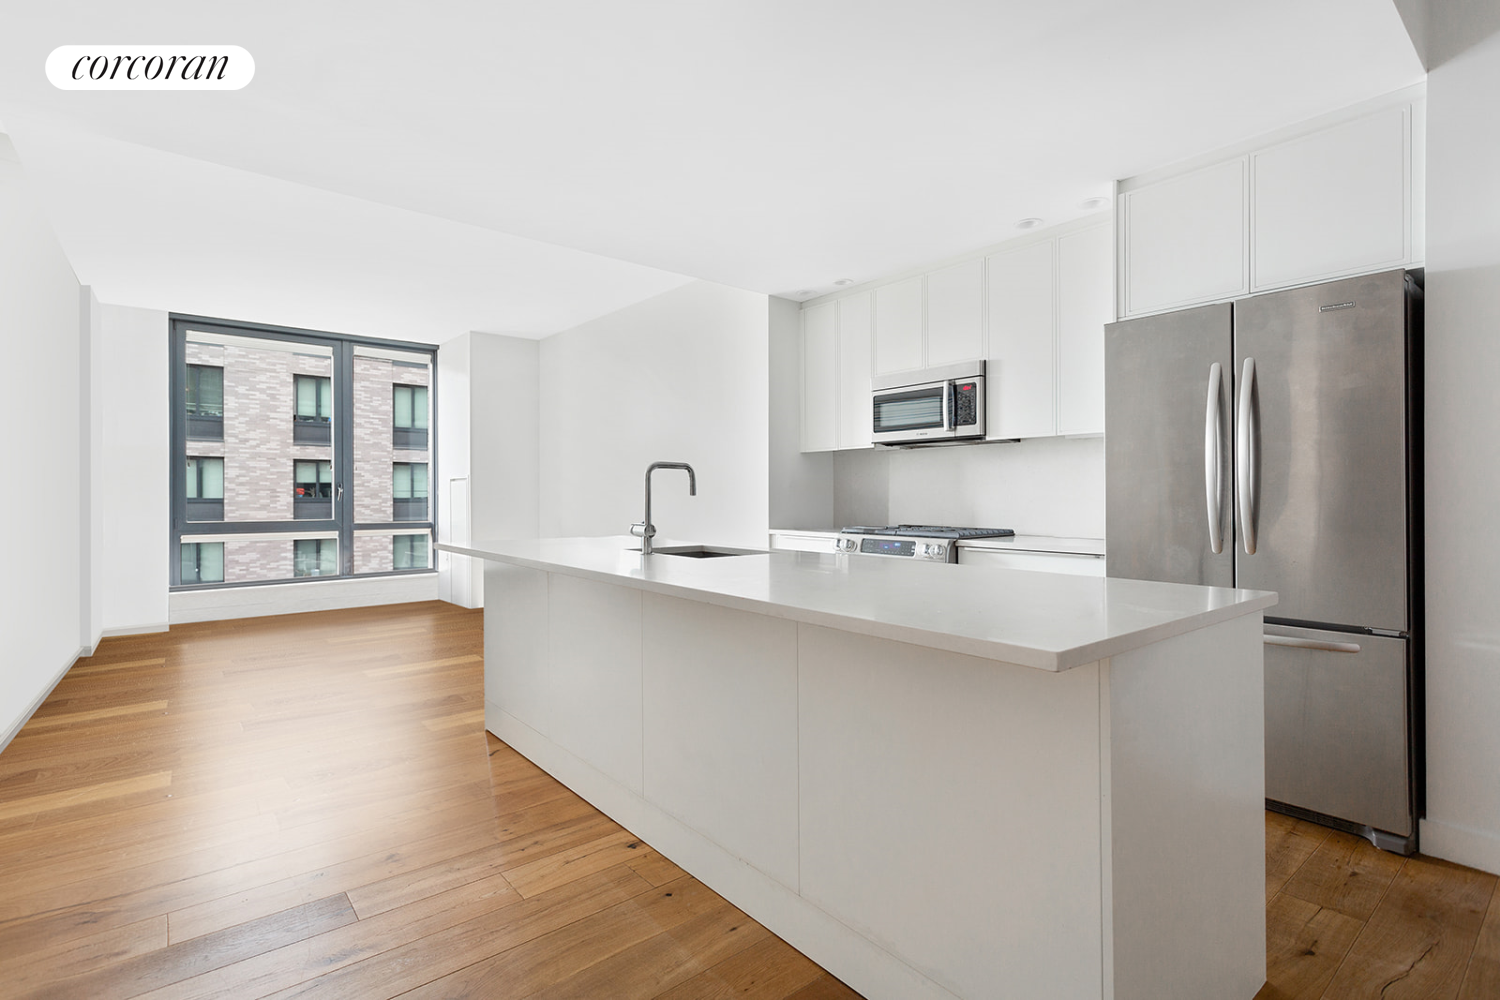 23 West 116th Street 7A, South Harlem, Upper Manhattan, NYC - 3 Bedrooms  
2 Bathrooms  
5 Rooms - 